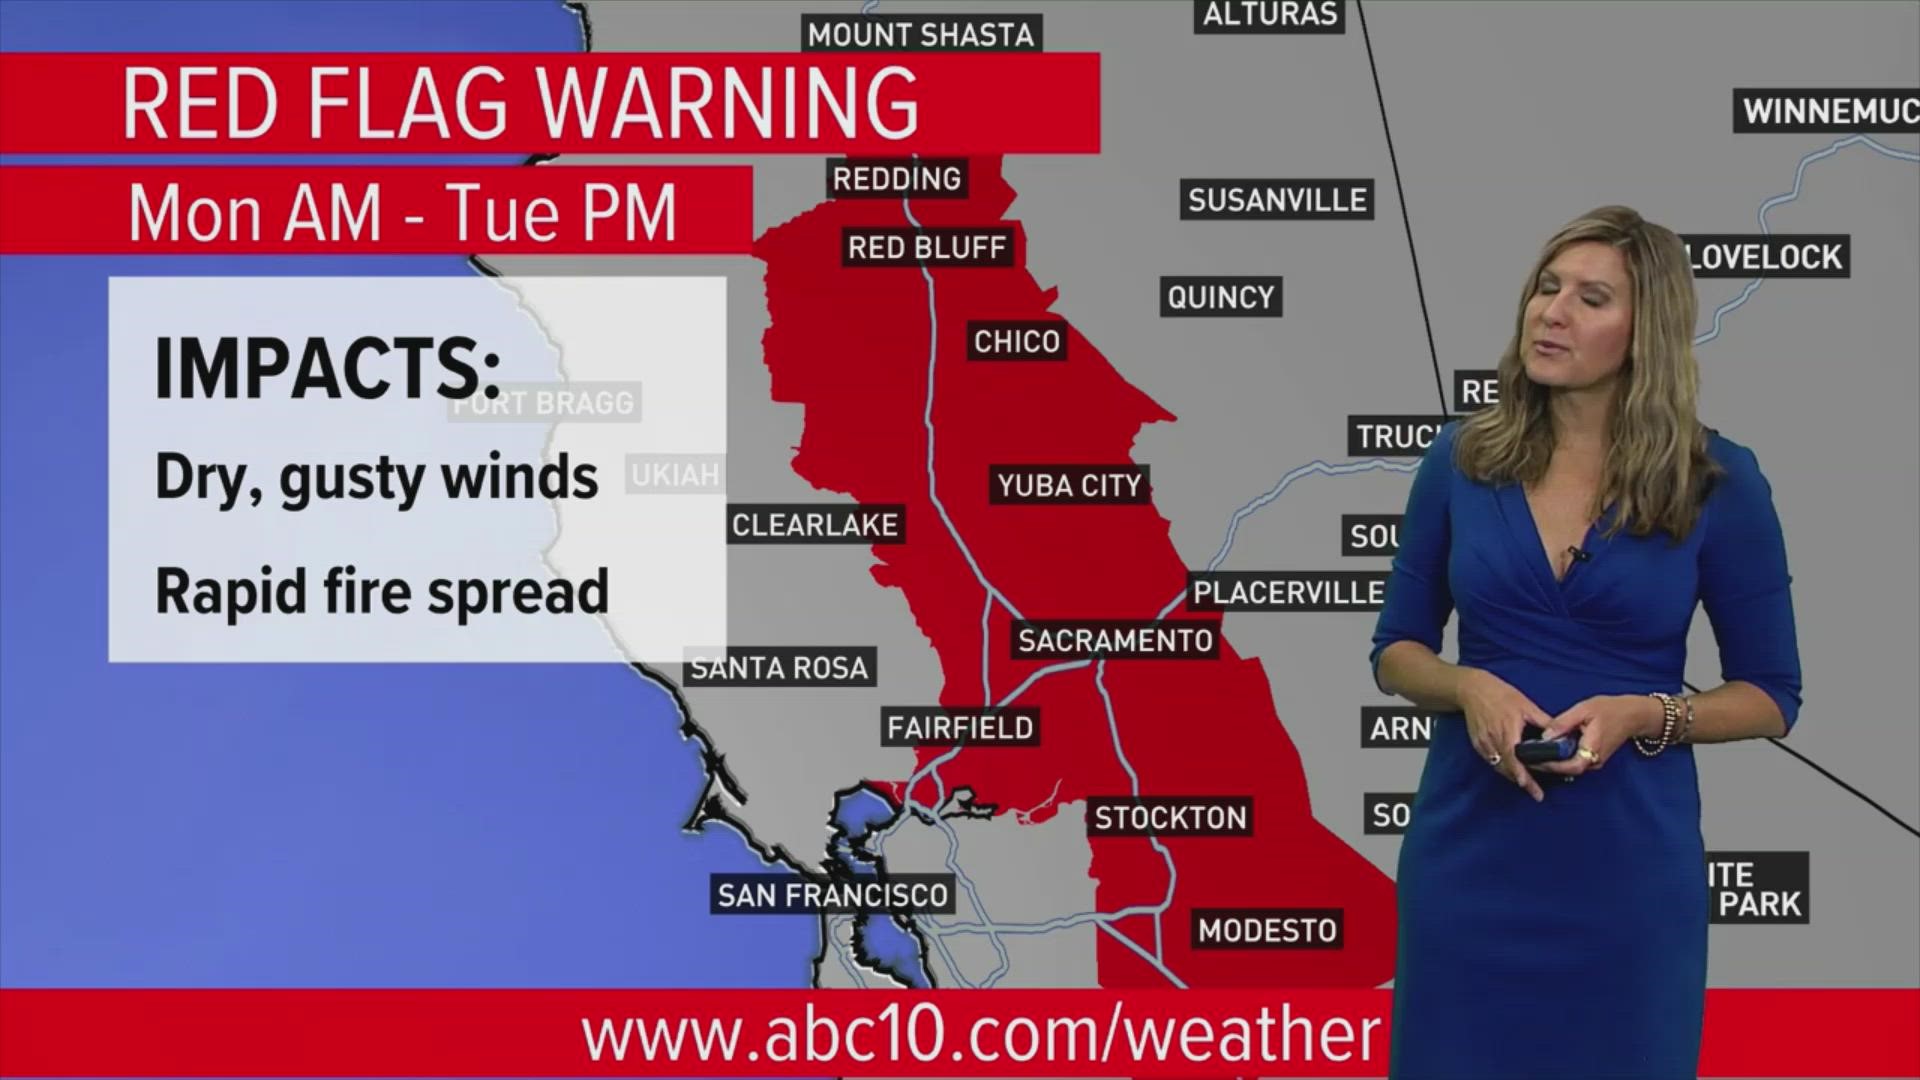 ABC10's Monica Woods breaks down the Red Flag Warning in Northern California. The warning highlights wildfire risk and potential rapid fire spread due to gusty winds